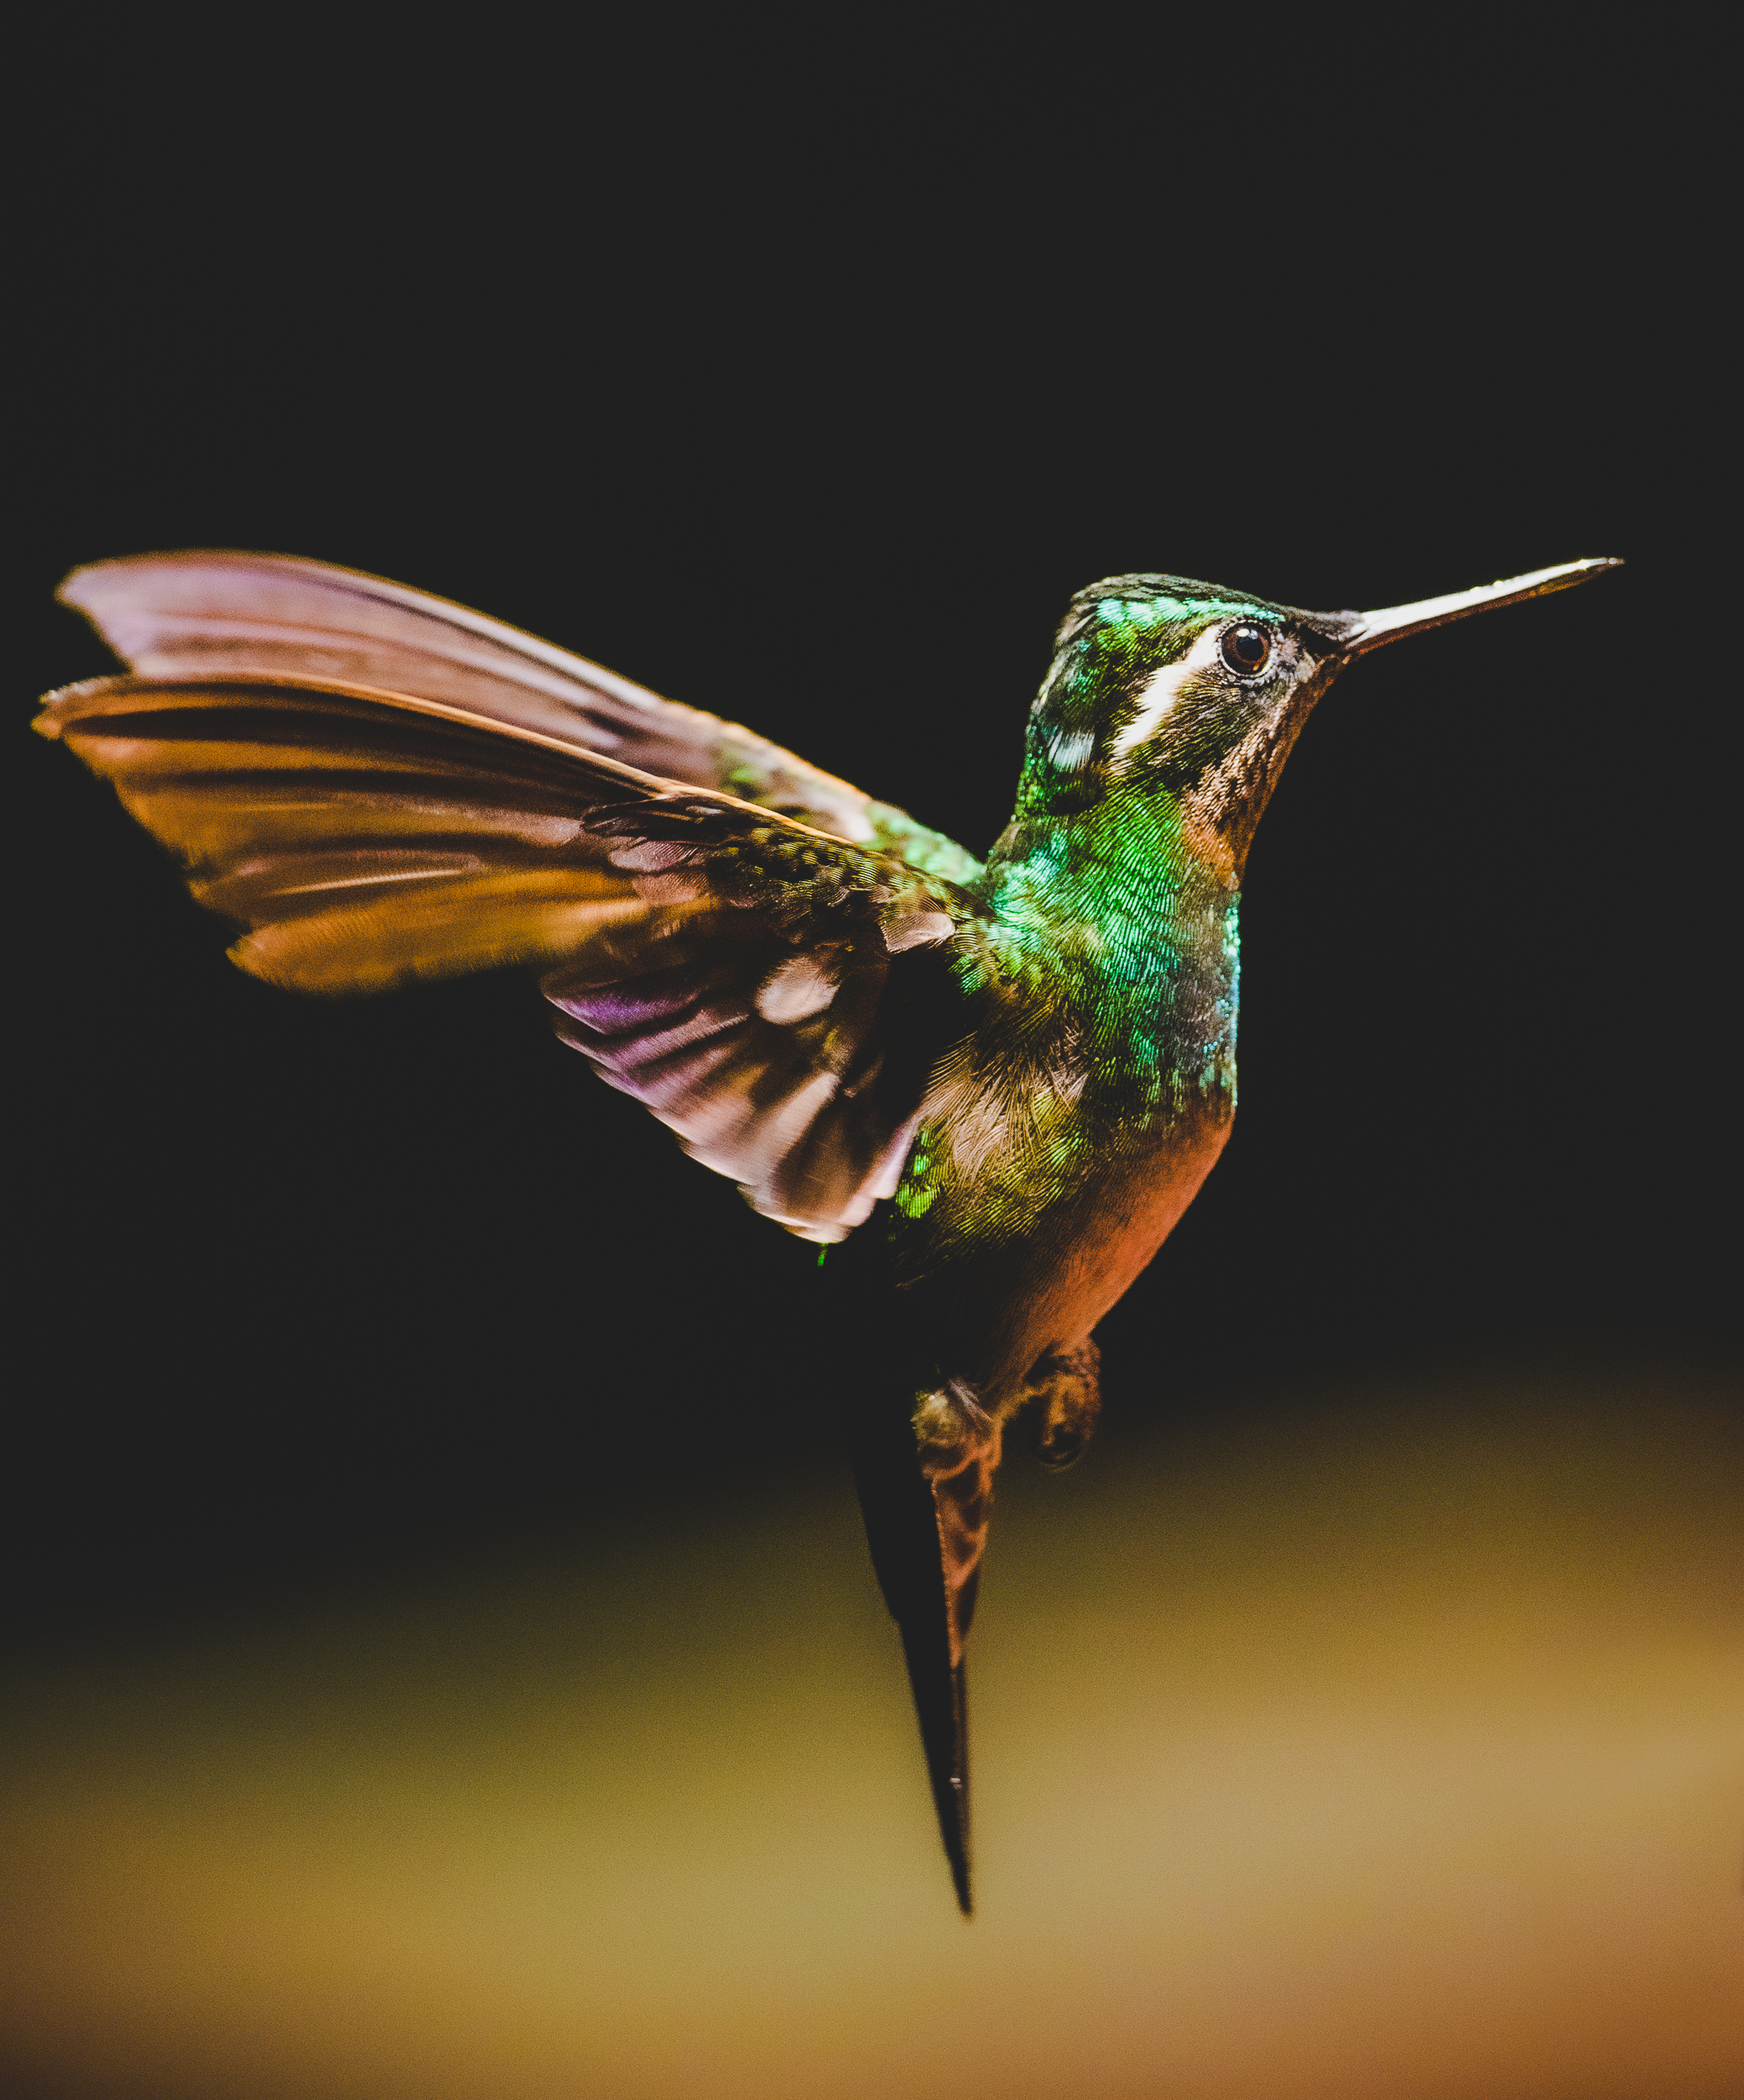 Flying hummingbird as seen from the side